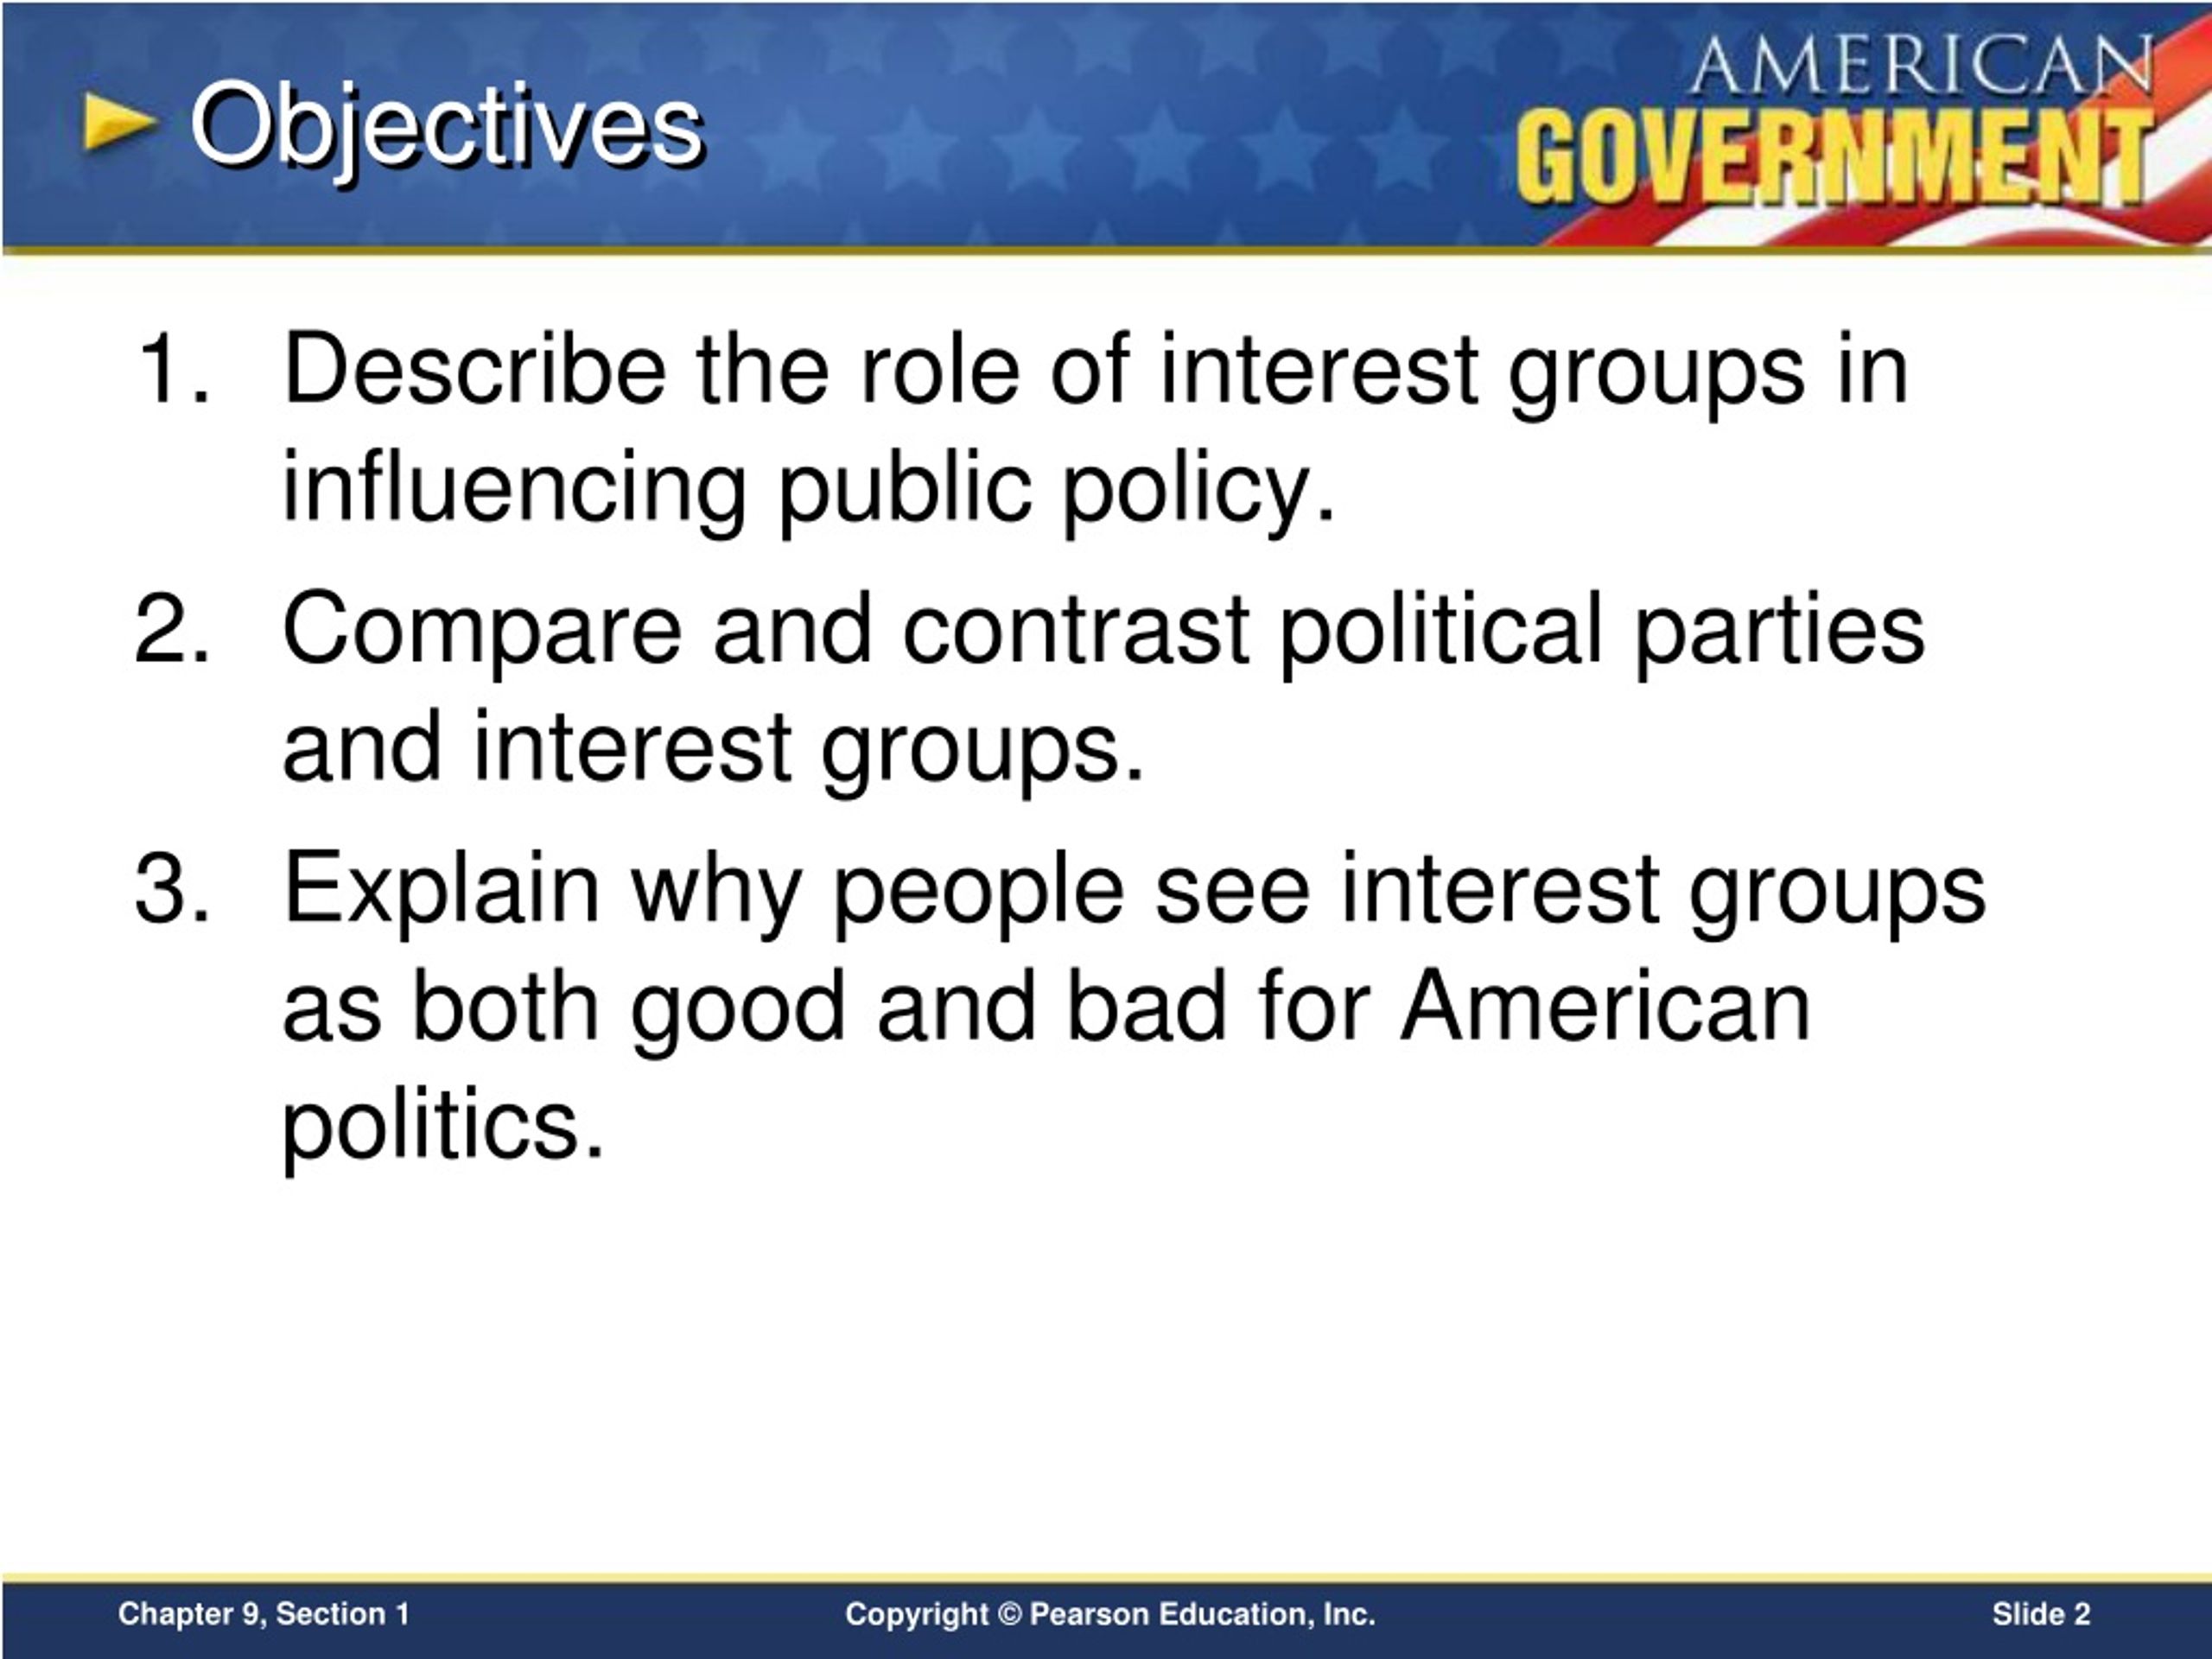 are interest groups good or bad for american democracy